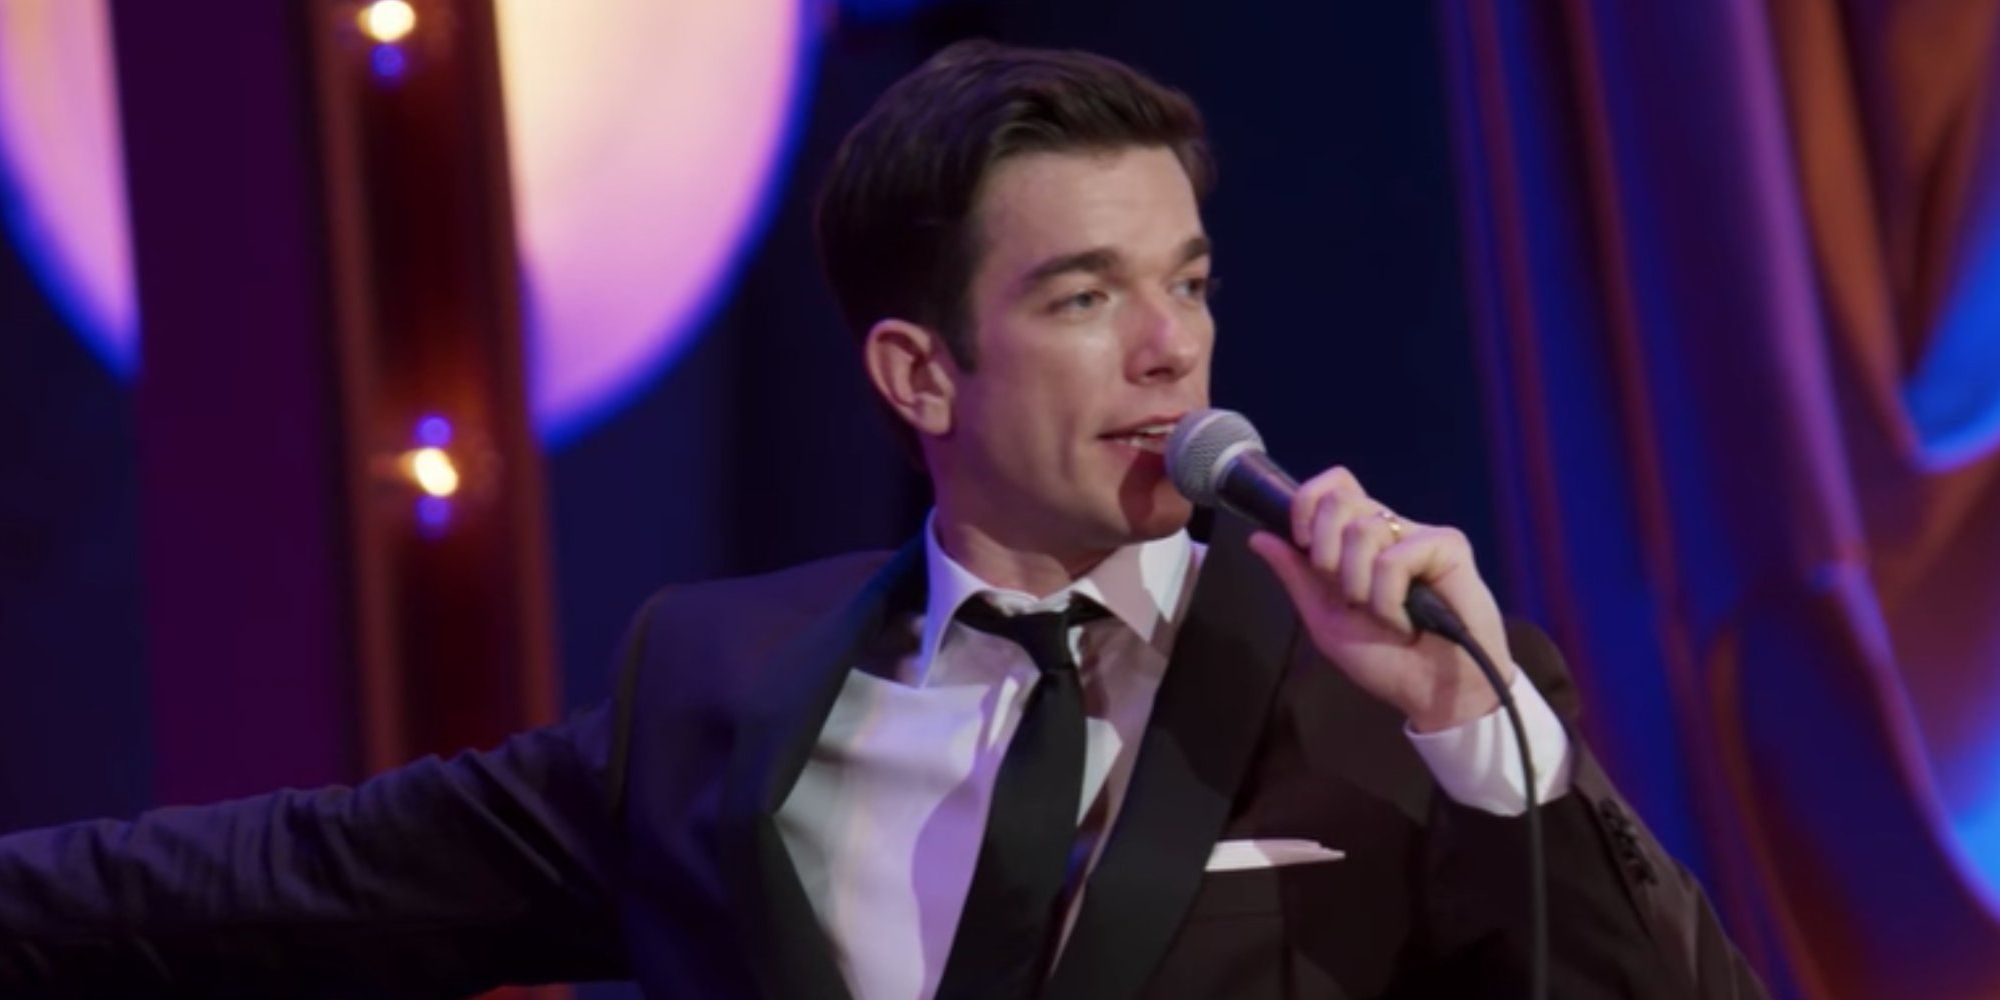 John Mulaney points behind him while speaking into a microphone at Radio City Music hall